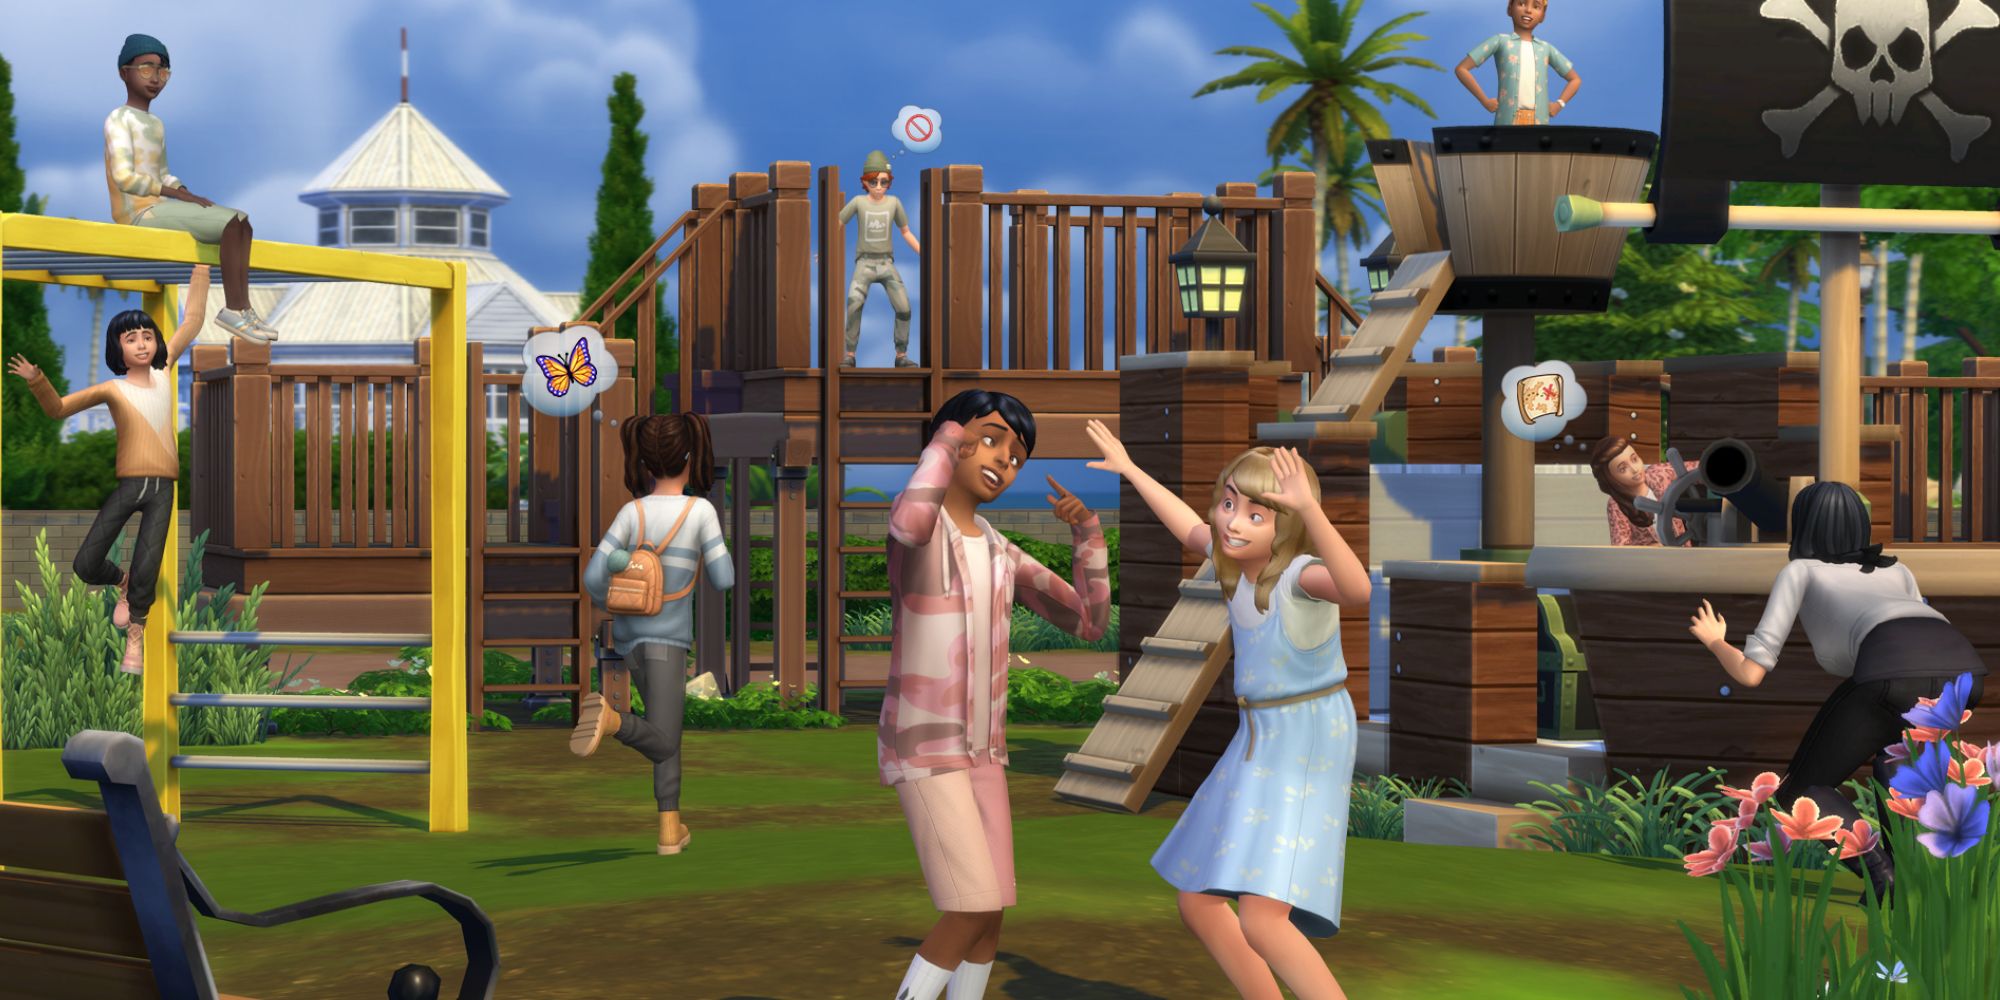 Sims 4 first fits 9 kids on a playground in new clothing